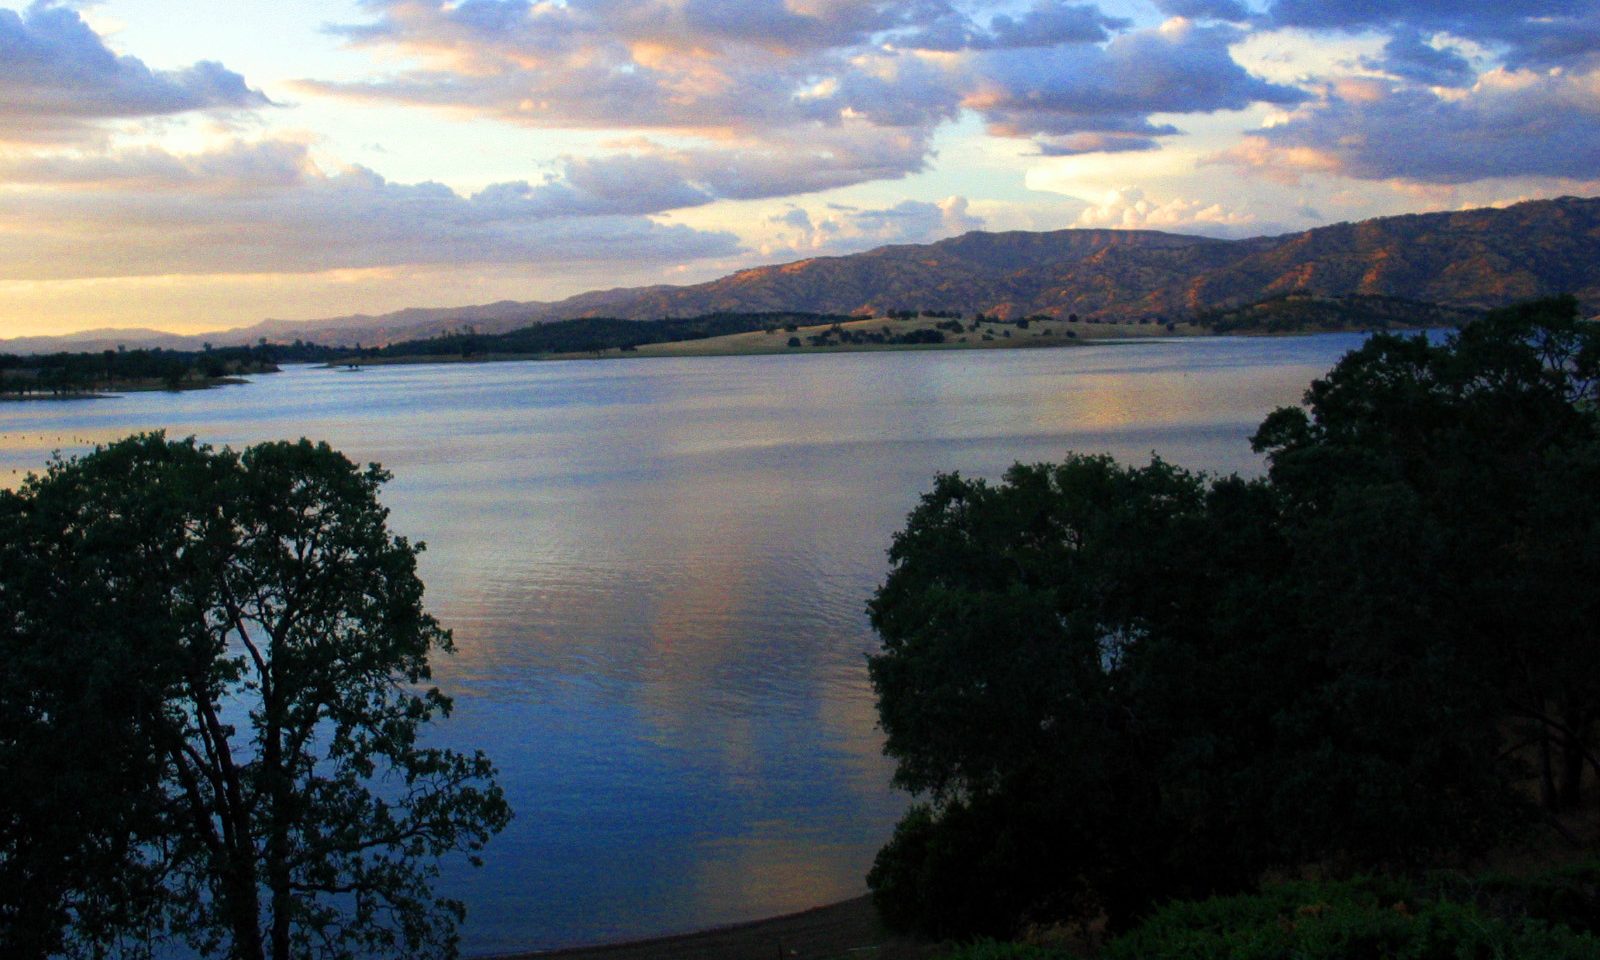 Drowning Reported At Lake Berryessa Body Yet To Be Recovered